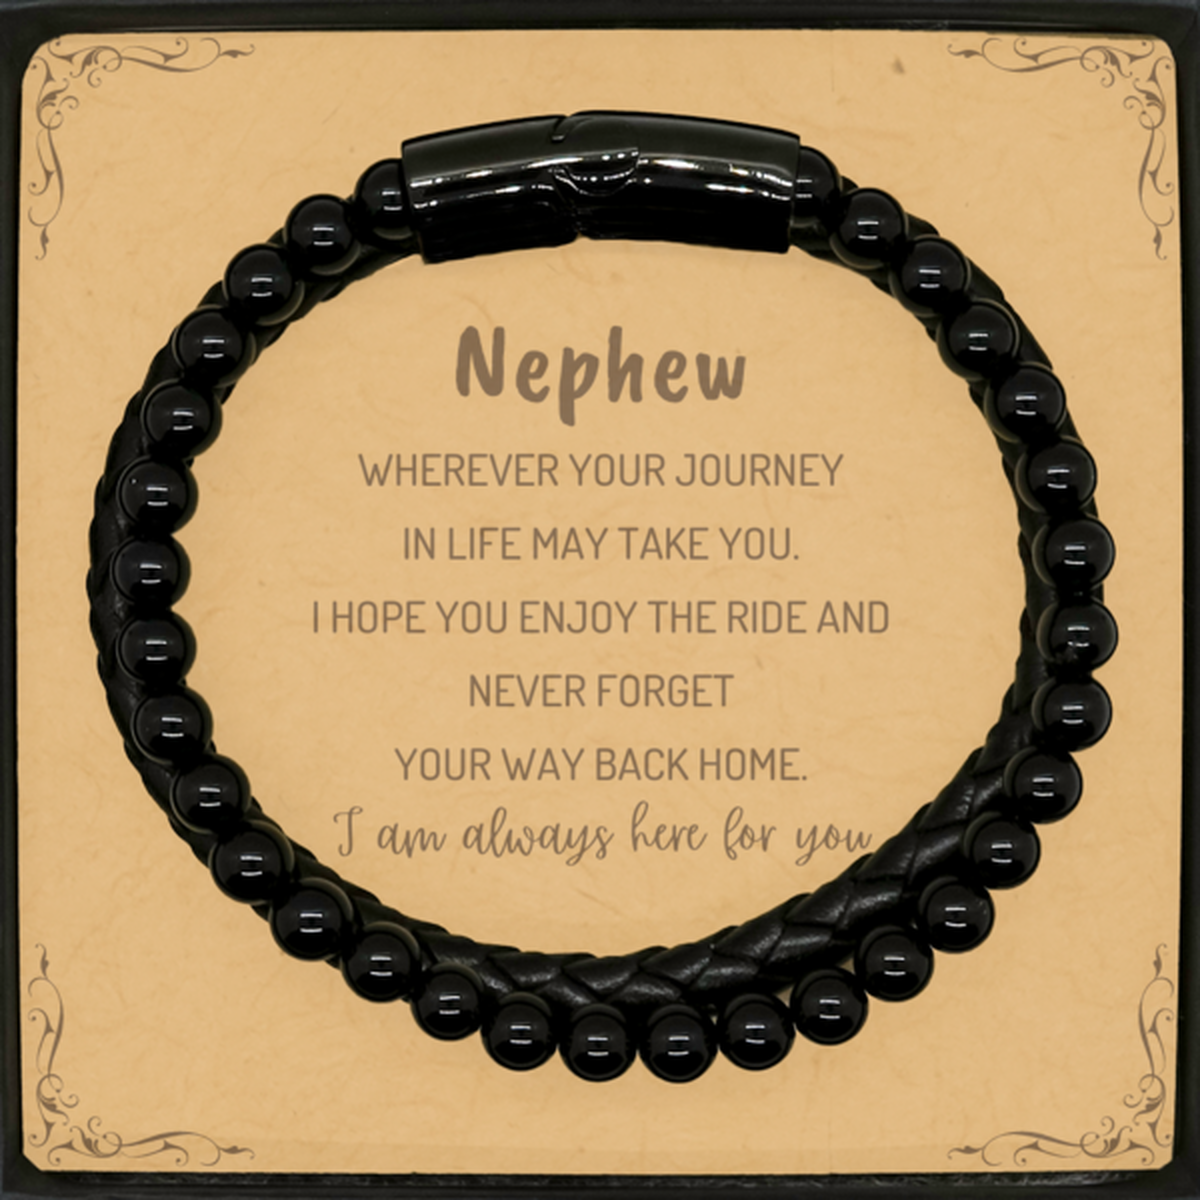 Nephew wherever your journey in life may take you, I am always here for you Nephew Stone Leather Bracelets, Awesome Christmas Gifts For Nephew Message Card, Nephew Birthday Gifts for Men Women Family Loved One